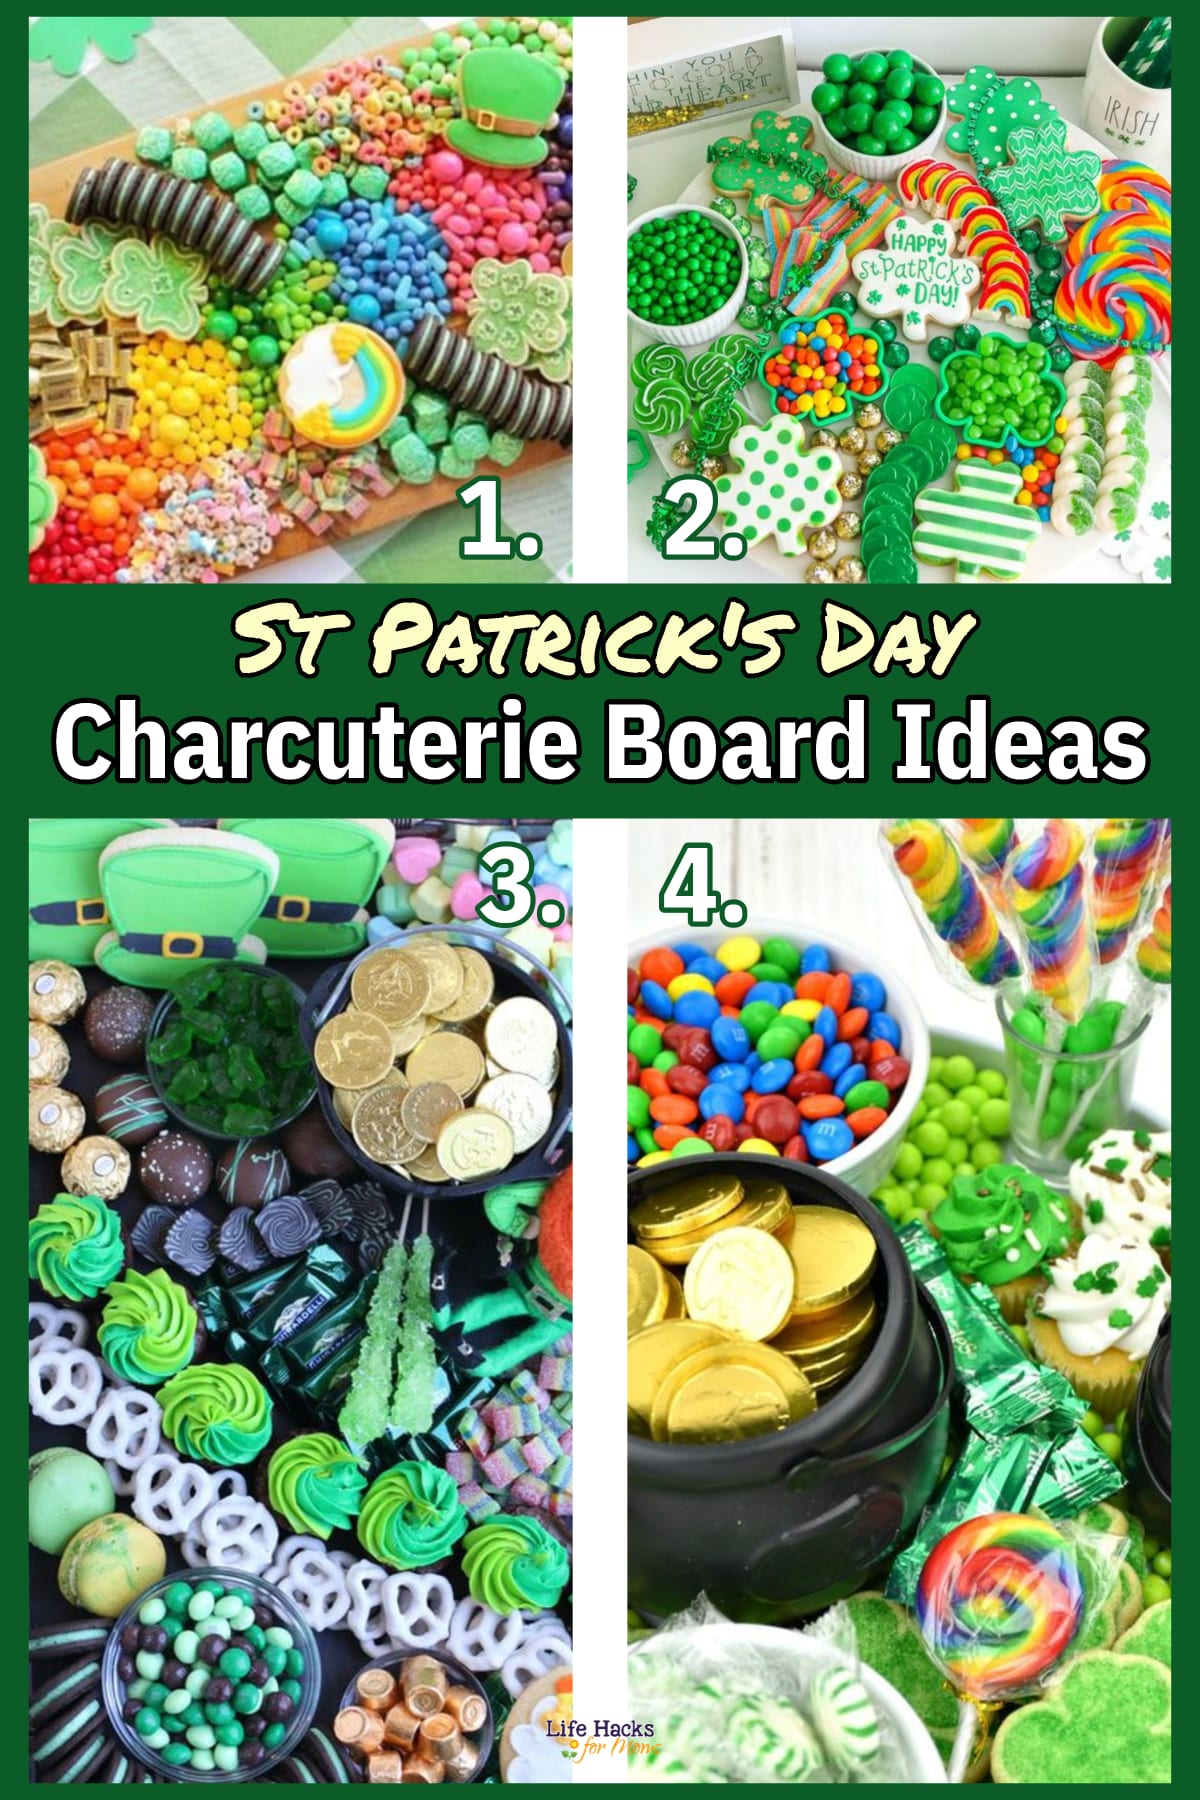 St Patrick's Day Charcuterie Board Ideas - Fun party platters and snack trays